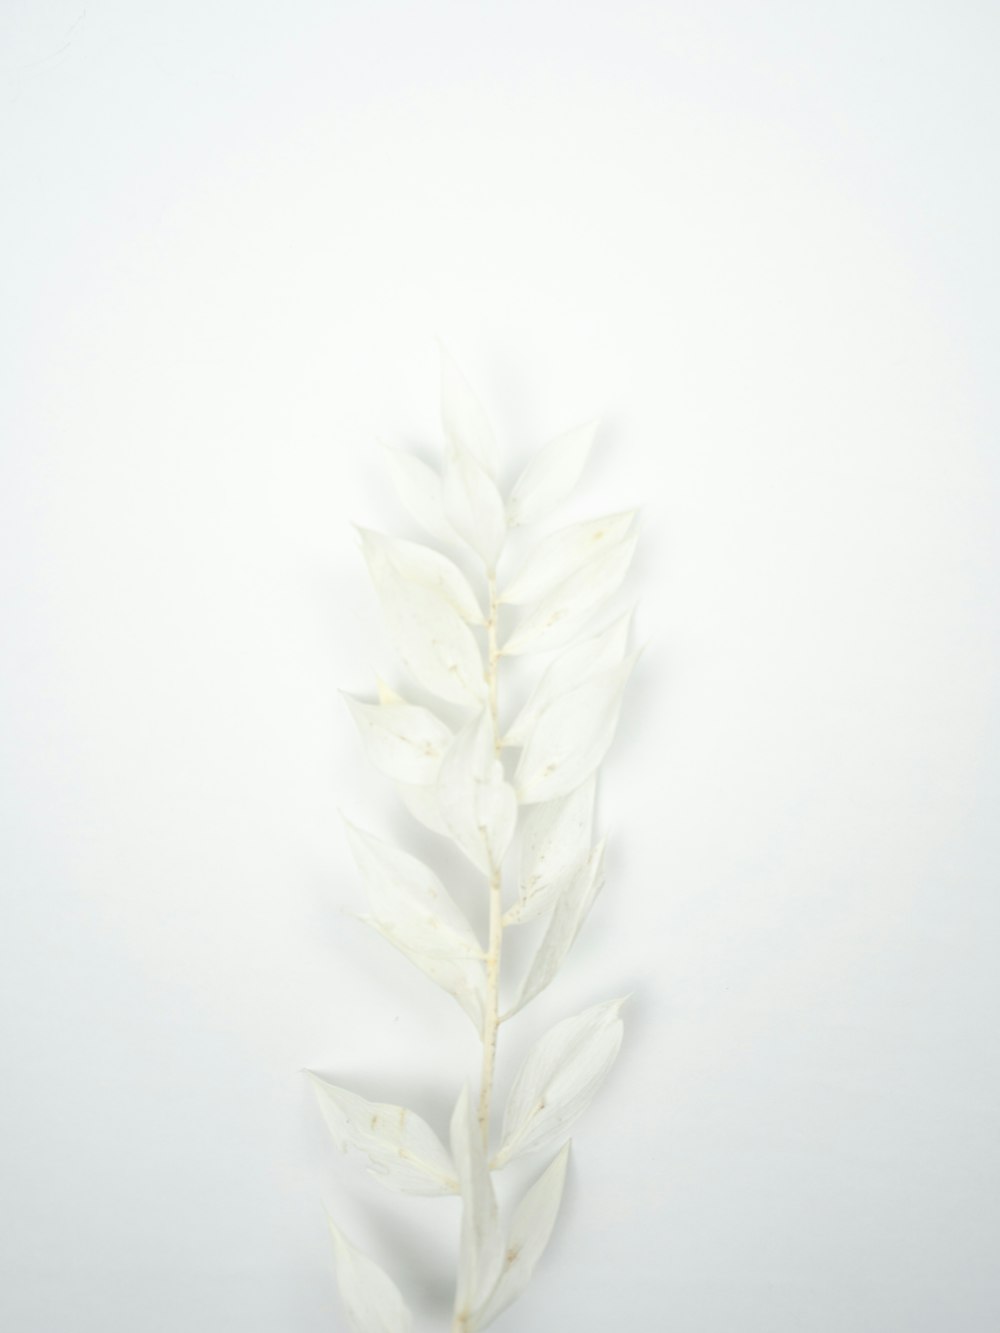 white and green plant on white surface